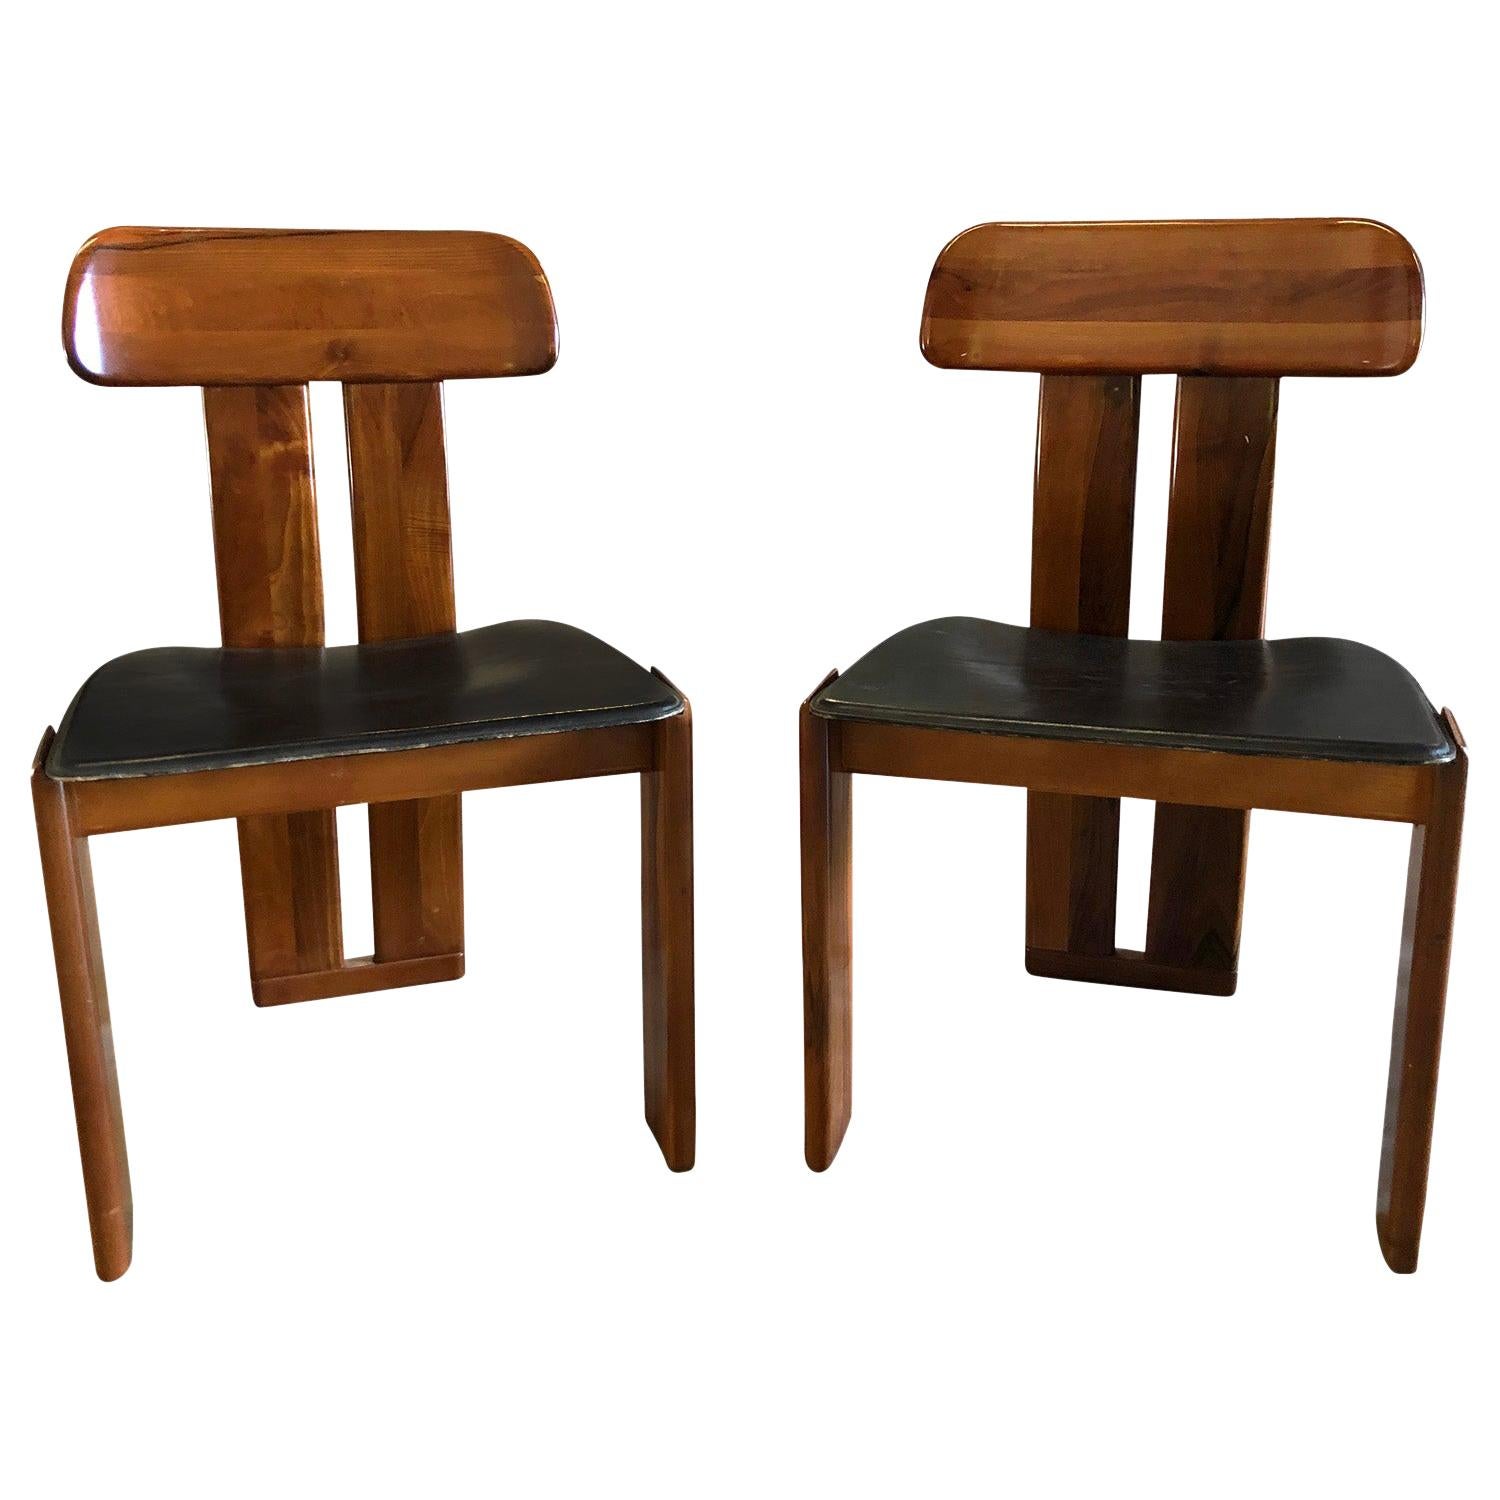 20th Century Pair of Italian Side Chairs by Tobia Scarpa